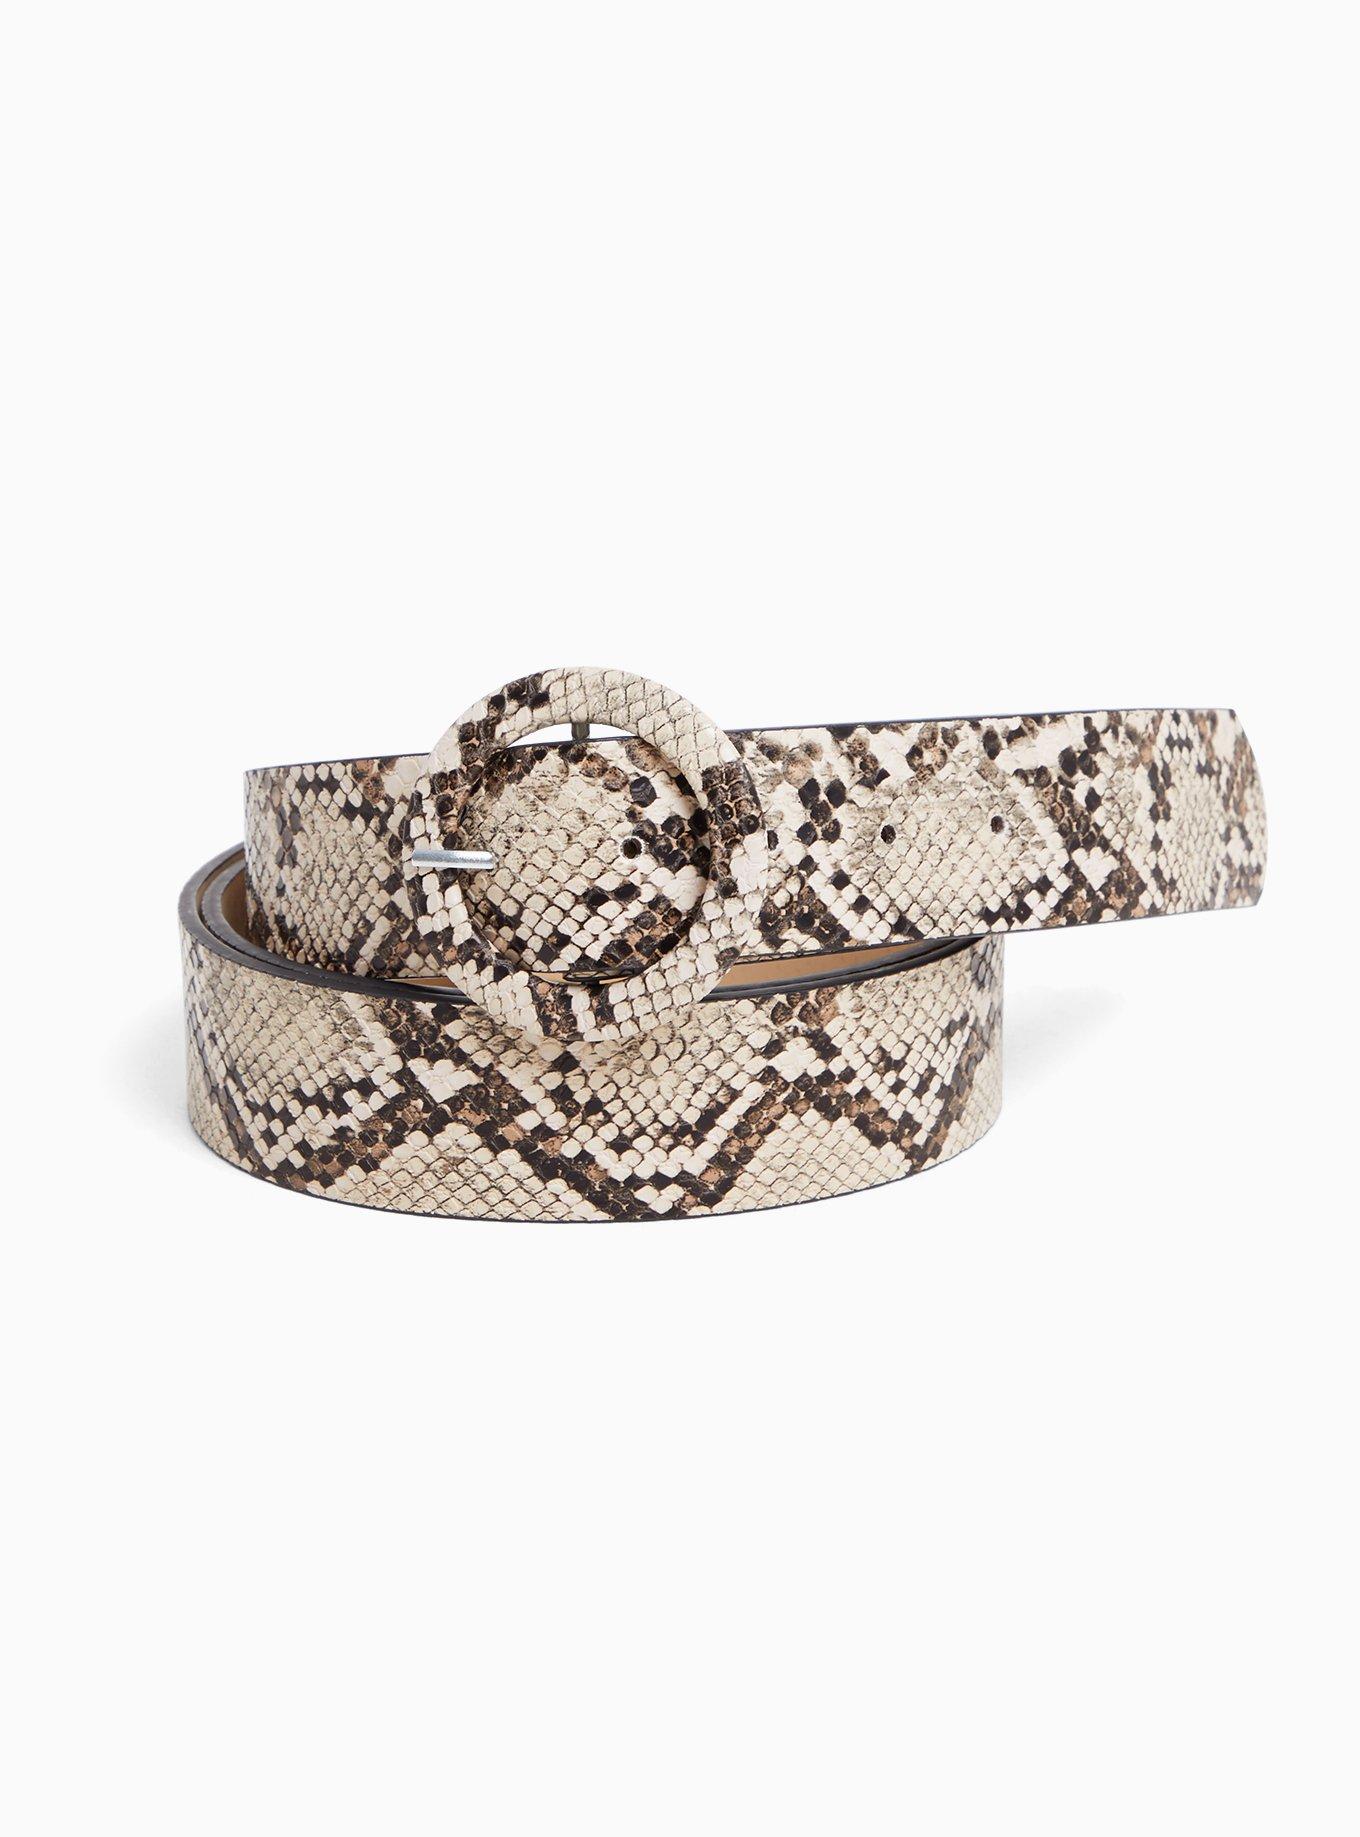 Vintage Snake Pattern Women's Belt, Pu Leather Belt, Casual Jeans Belt,  Perfect For Everyday Outfits